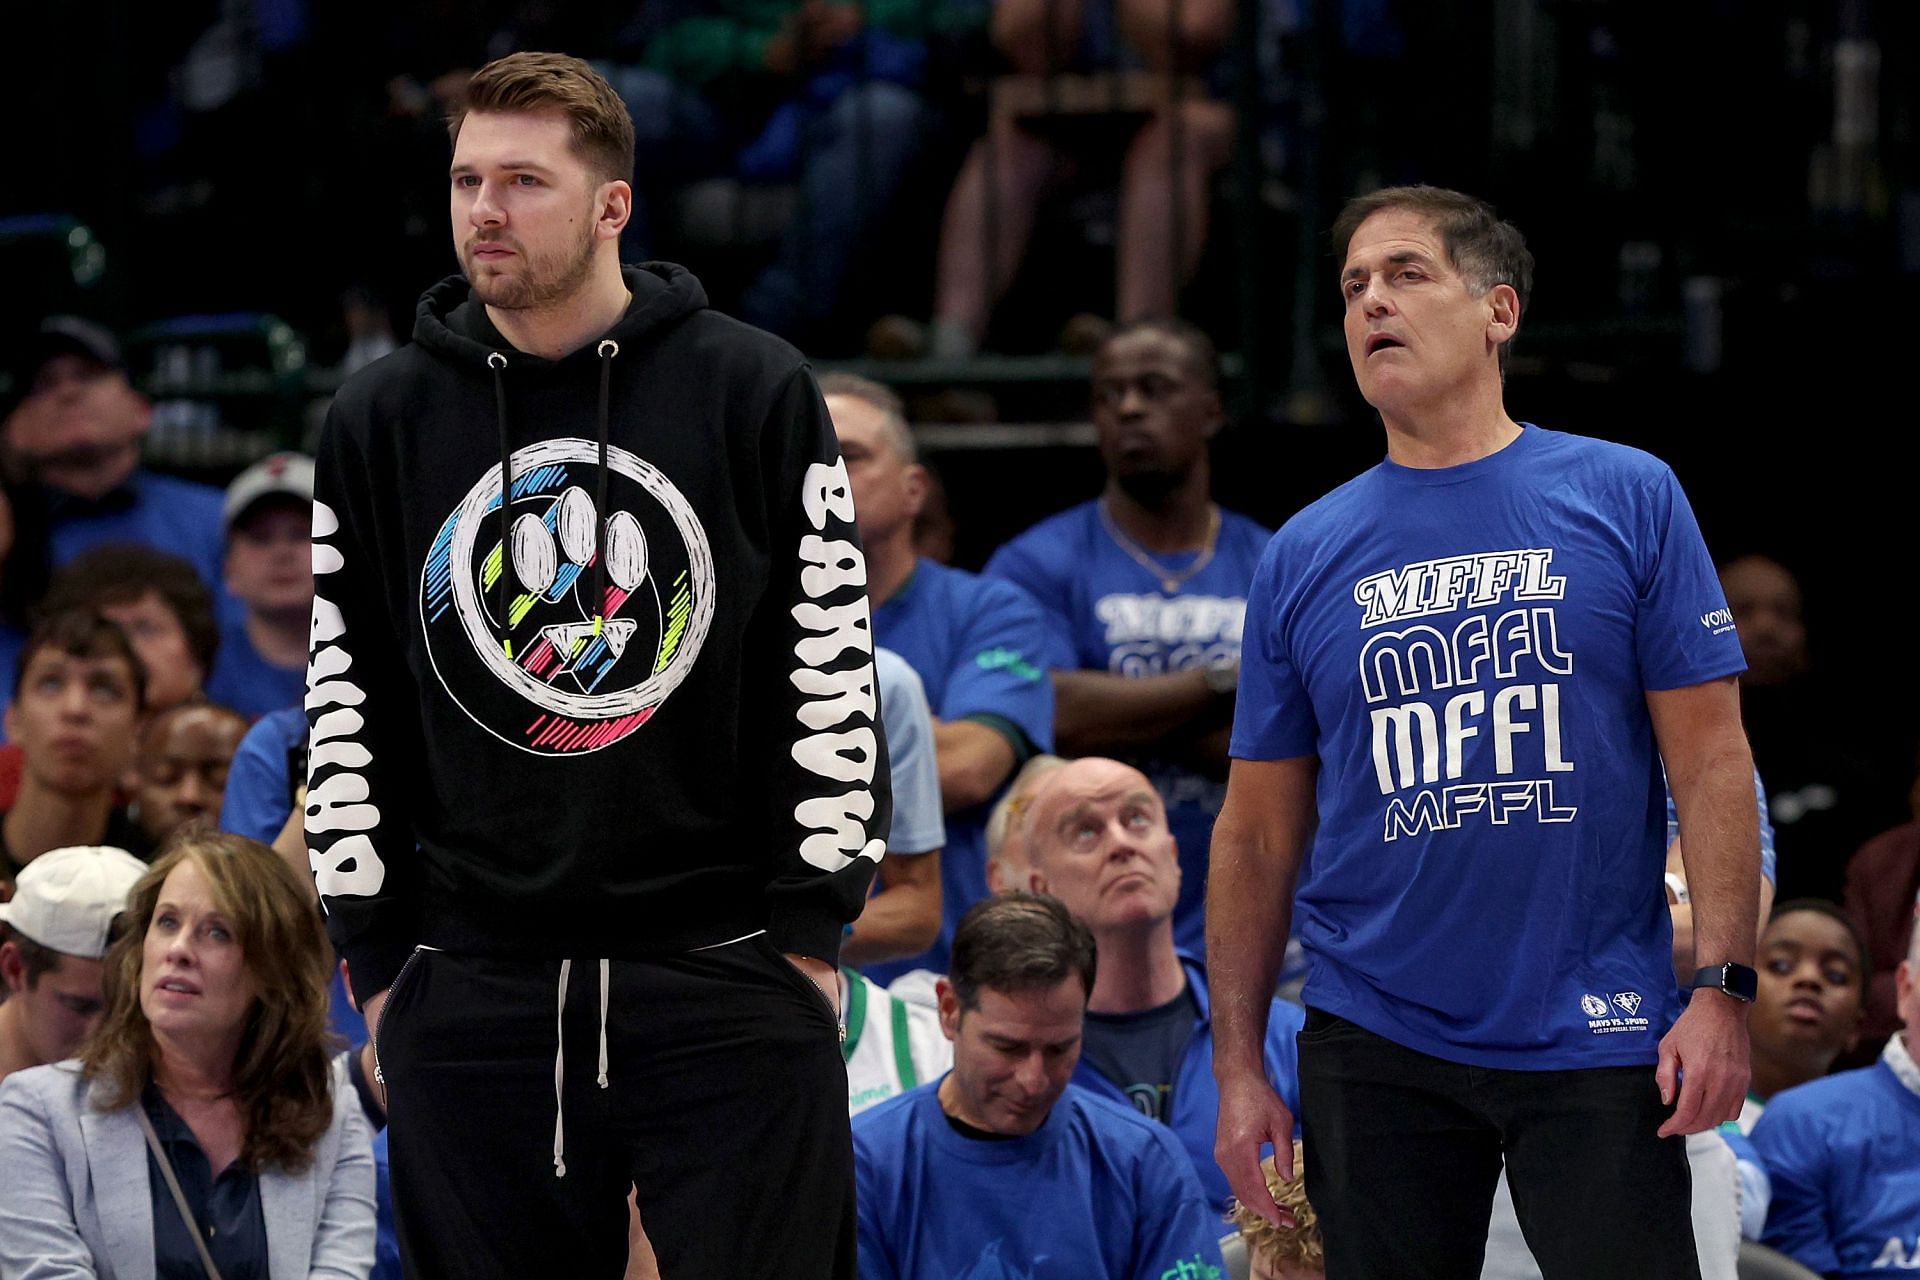 Mark Cuban Reveals That the Dallas Mavericks Almost Traded for